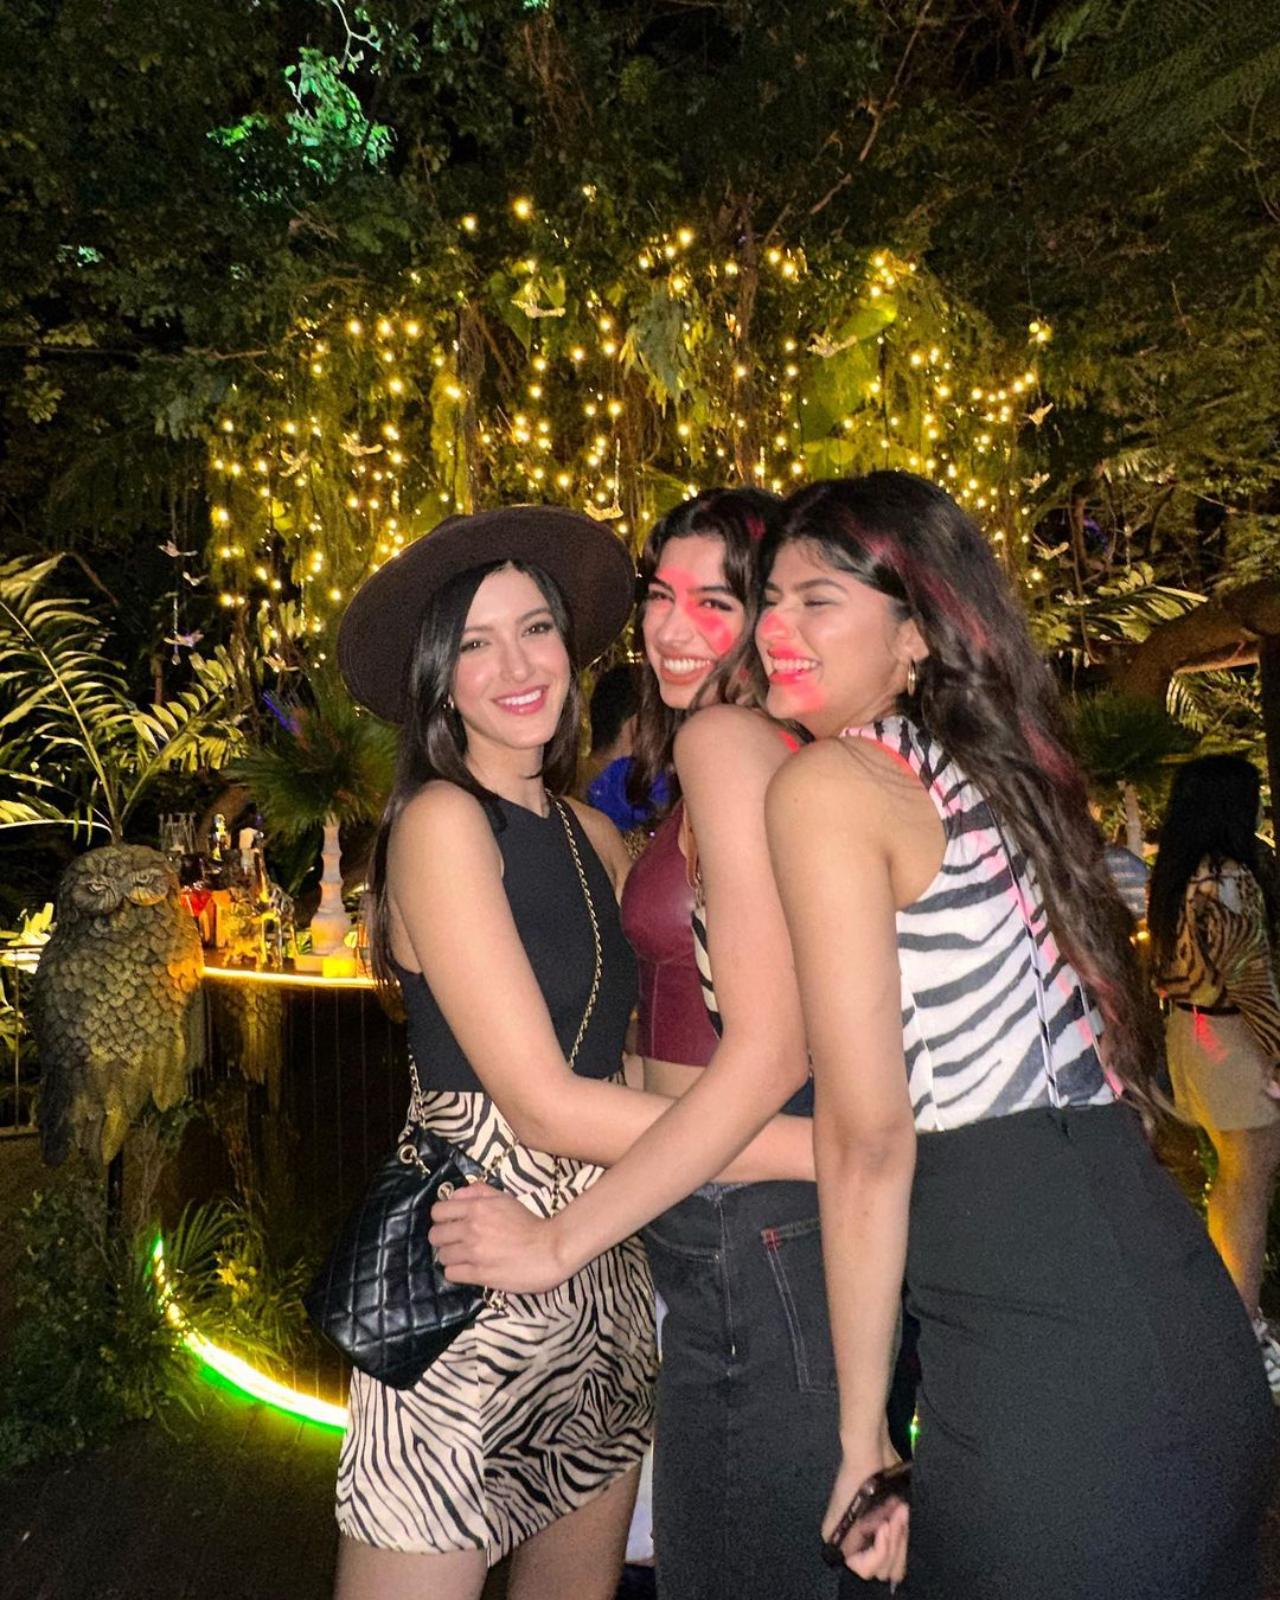 Shanaya, too, shared a picture with Khushi and Anjini. The three girls opted for an urban, chic look for the party